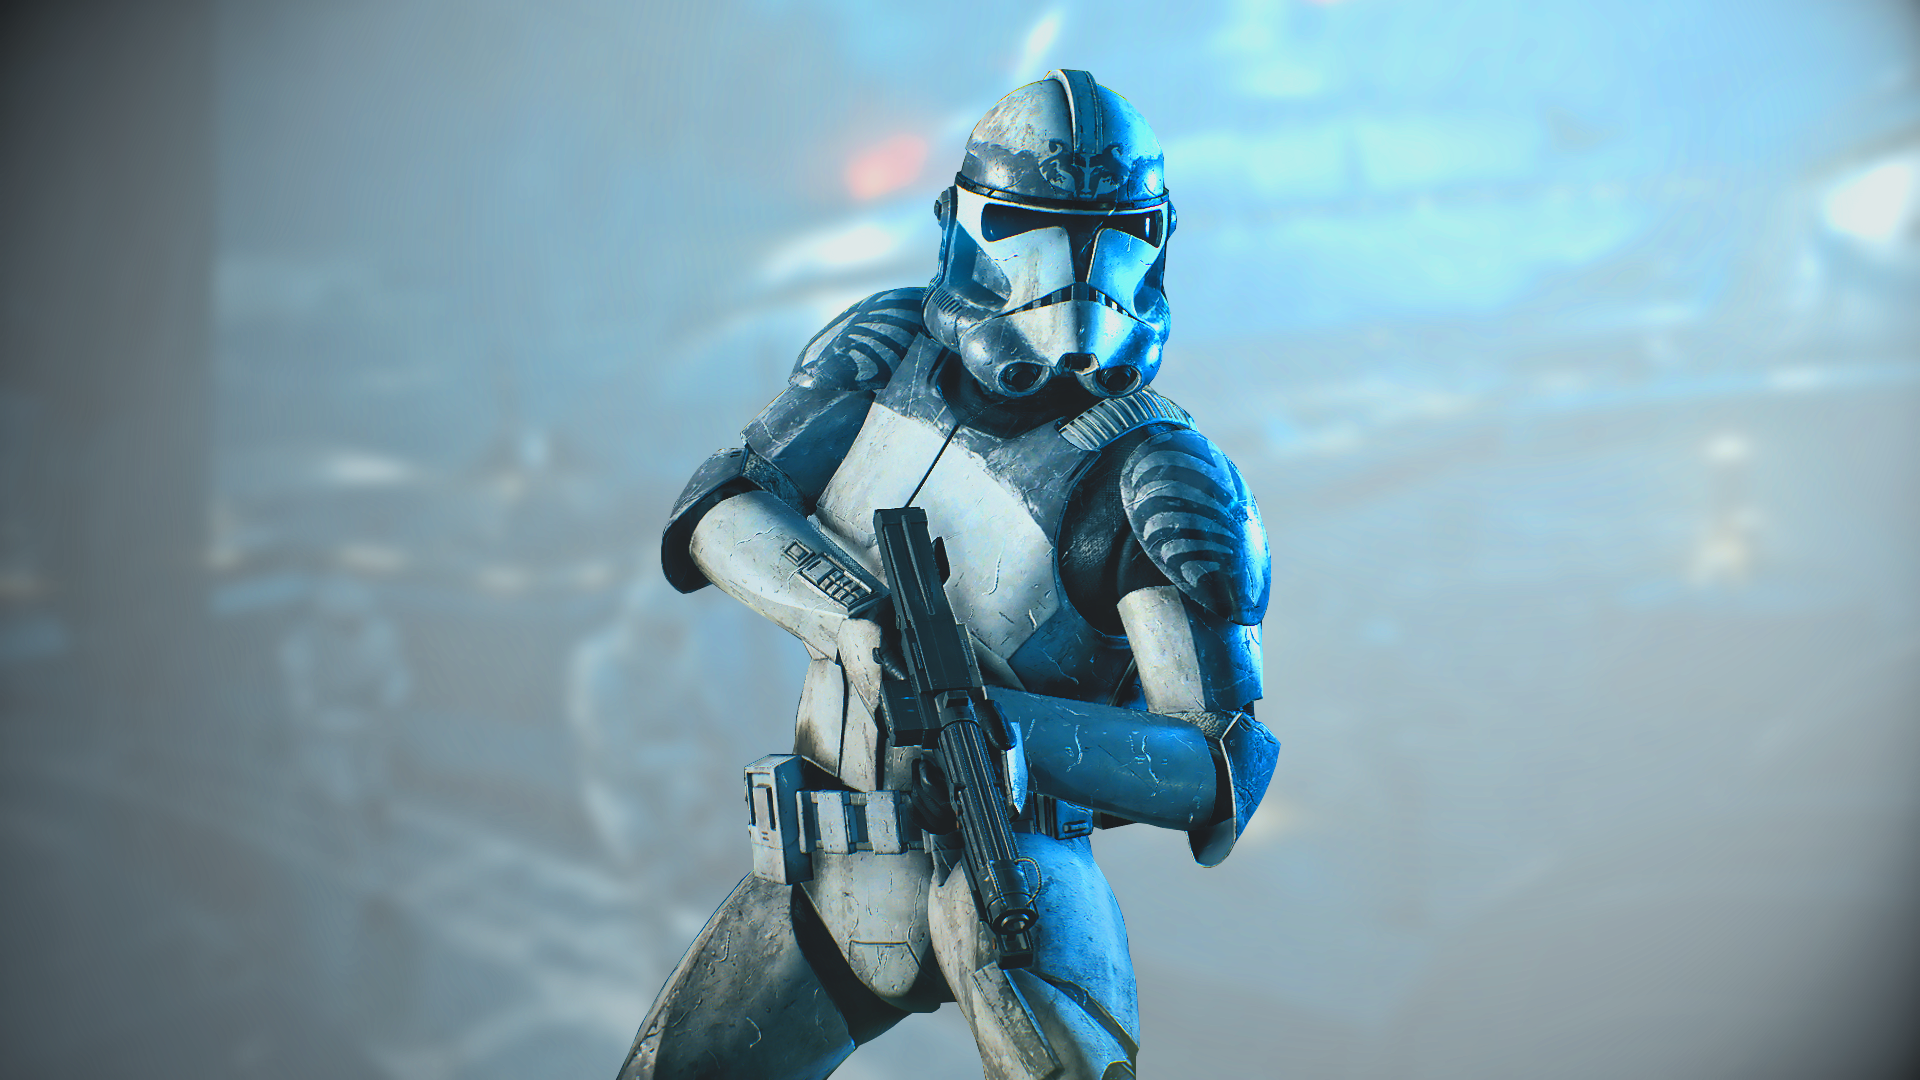 Clone Trooper Phase 2 Wallpapers - Wallpaper Cave